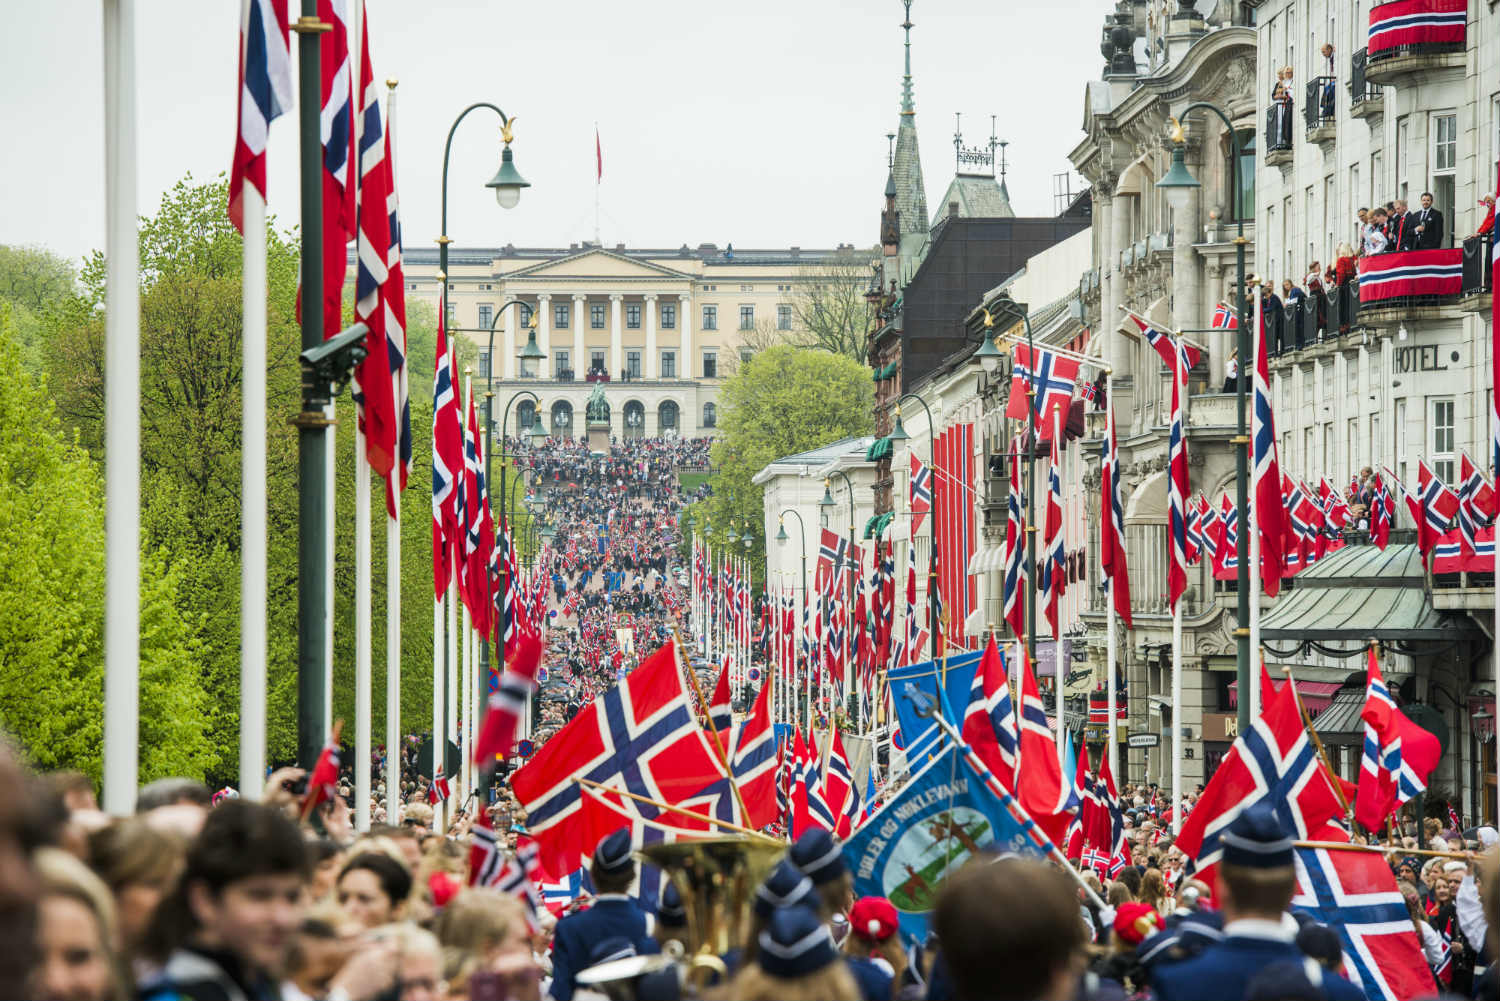 In pictures Norway’s national day